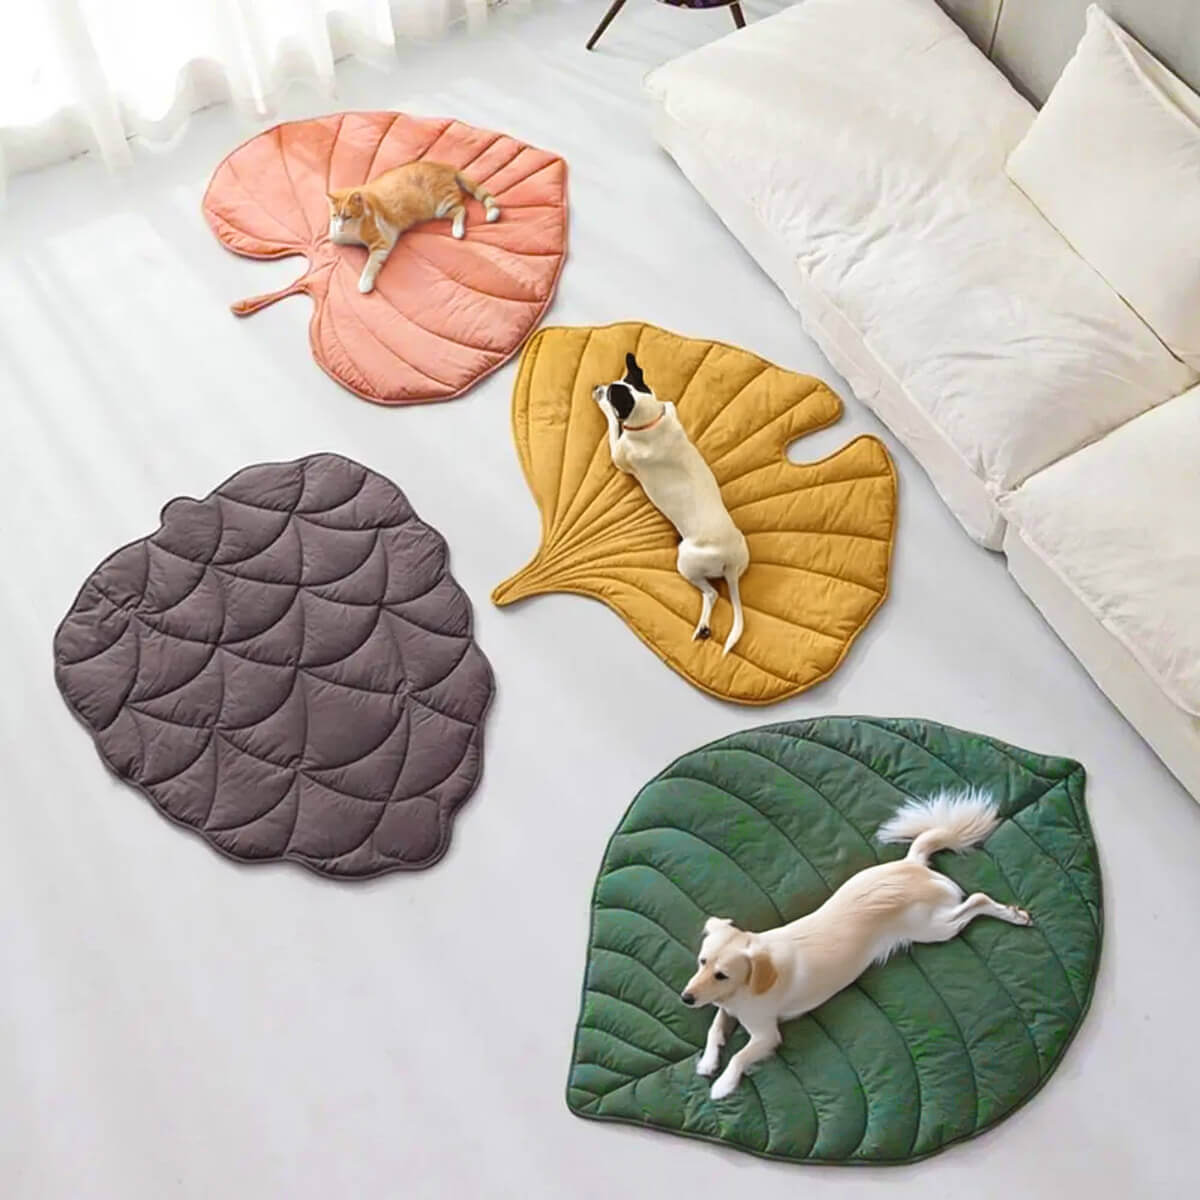 Stellar-Skeleton-Chill-Out-Leaf-Pet-Cooling-Mat-Cooling-Mat-for-Dogs-Cats-Bunnies-Rabbits-Pet-Cooling-Blanket